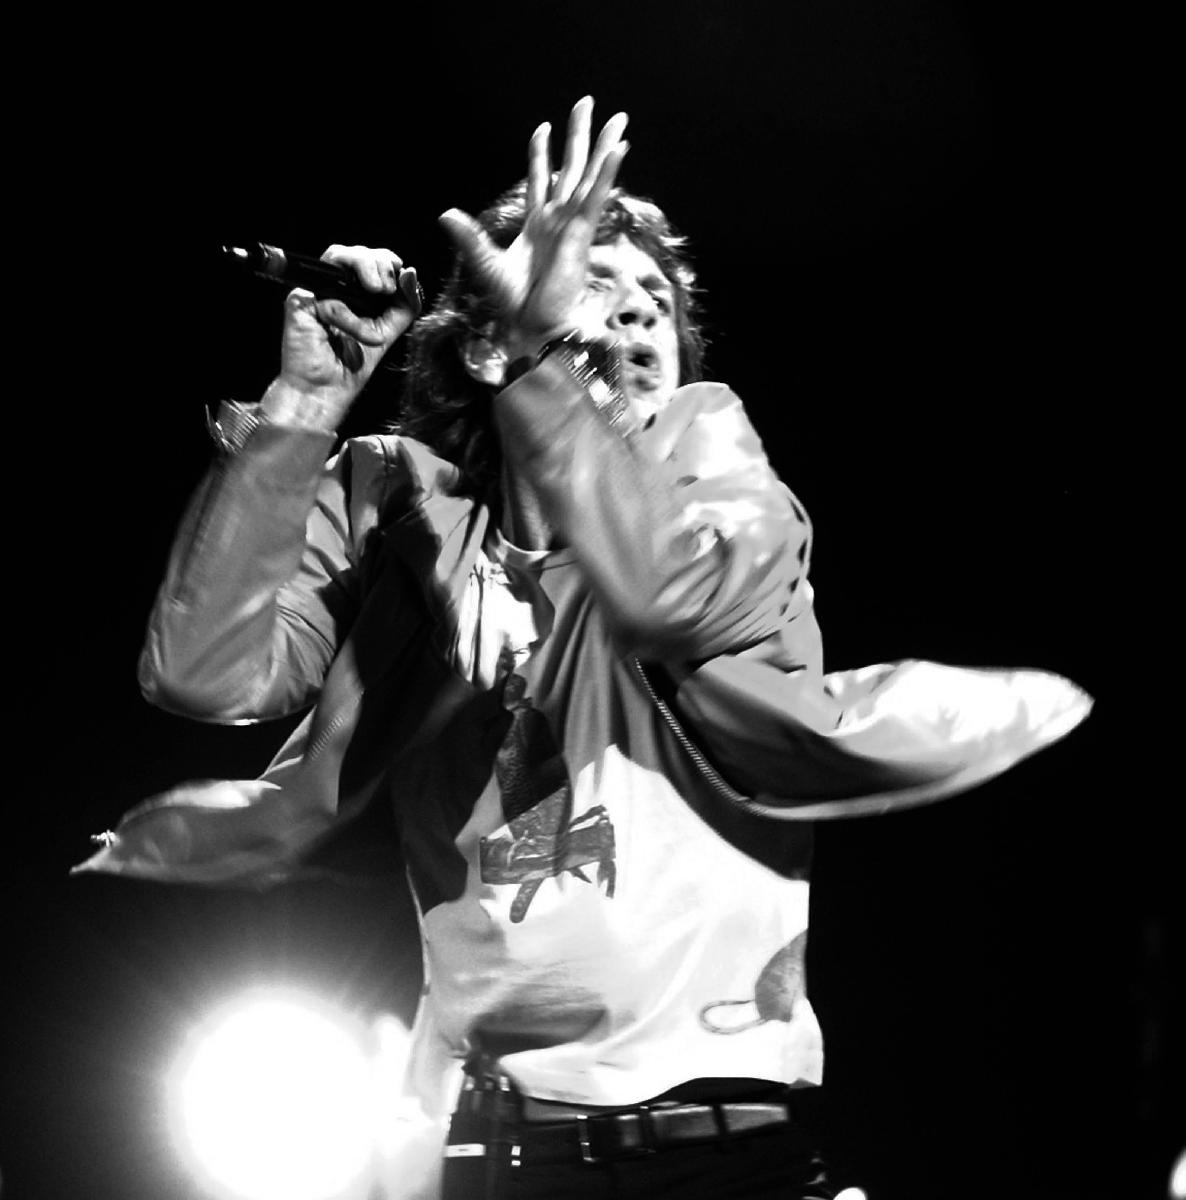 Craig Baxter; Mick Jagger 2003;Rollin Stones frontman Mick Jagget in action, Auckland 2003